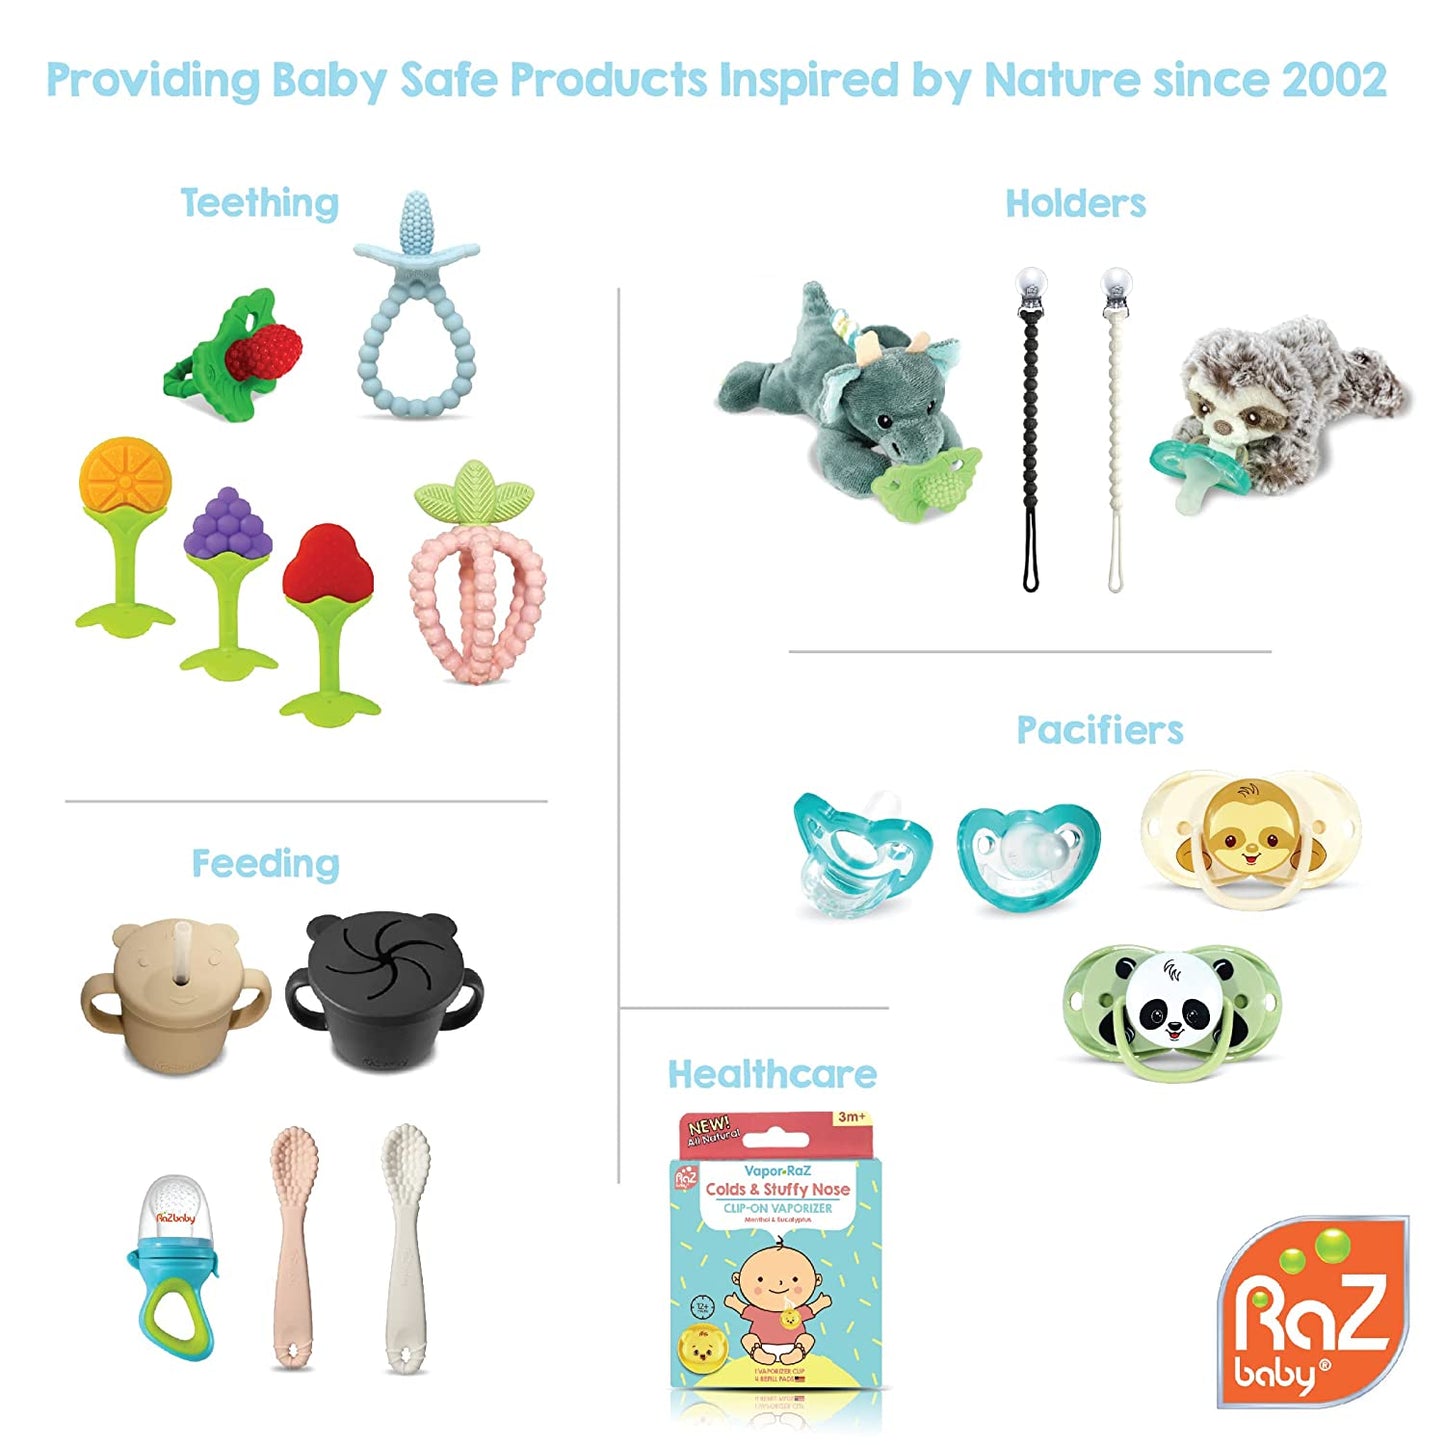 Baby Solids/Frozen Fruit Feeder Pacifier, Infant Teether Toy 6M+, Bpa-Free Silicone Pouch & Nipple, Safely Introduce Solids, Natural Teething Relief, Dishwasher Safe, Freezable – Green/Blue